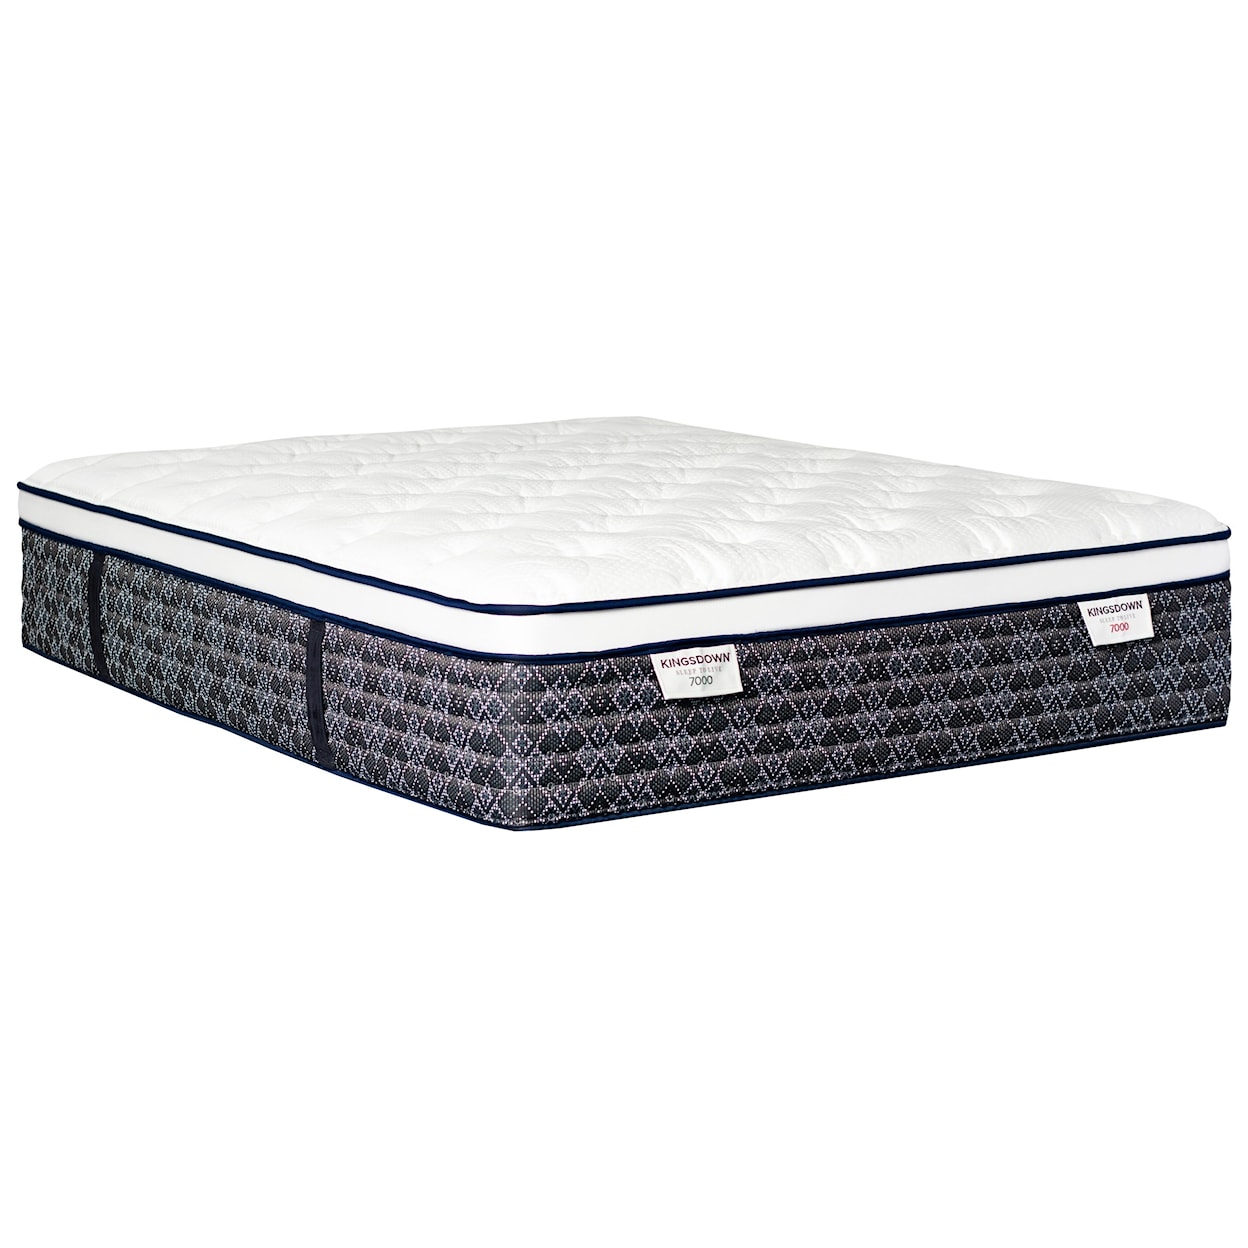 Kingsdown Sleep to Live 7000 Green Red ET Queen Pocketed Coil Mattress